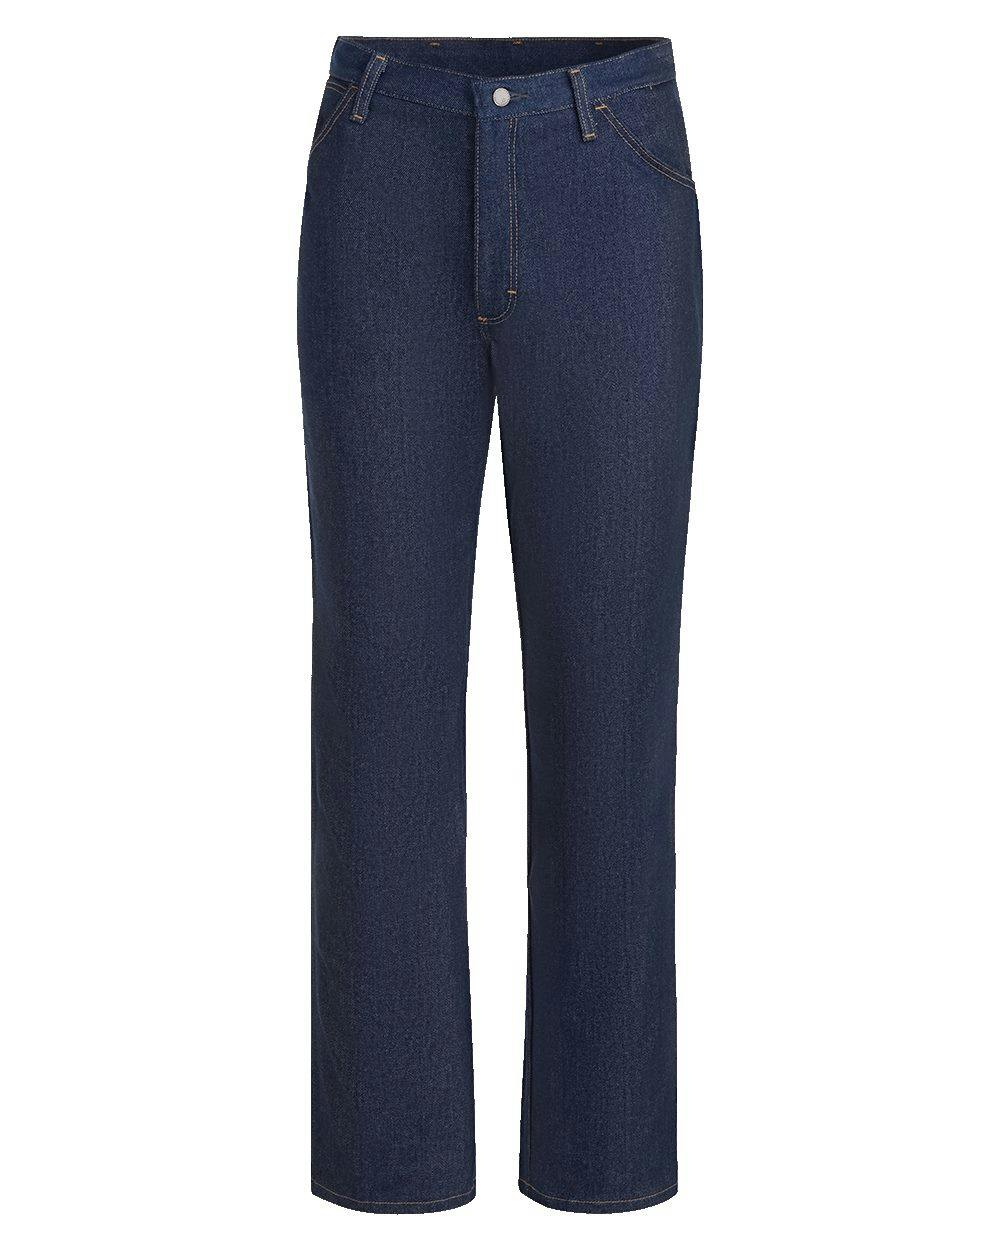 Image for Flame Resistant Jean-Style Pants - Extended Sizes - PEJ2EXT